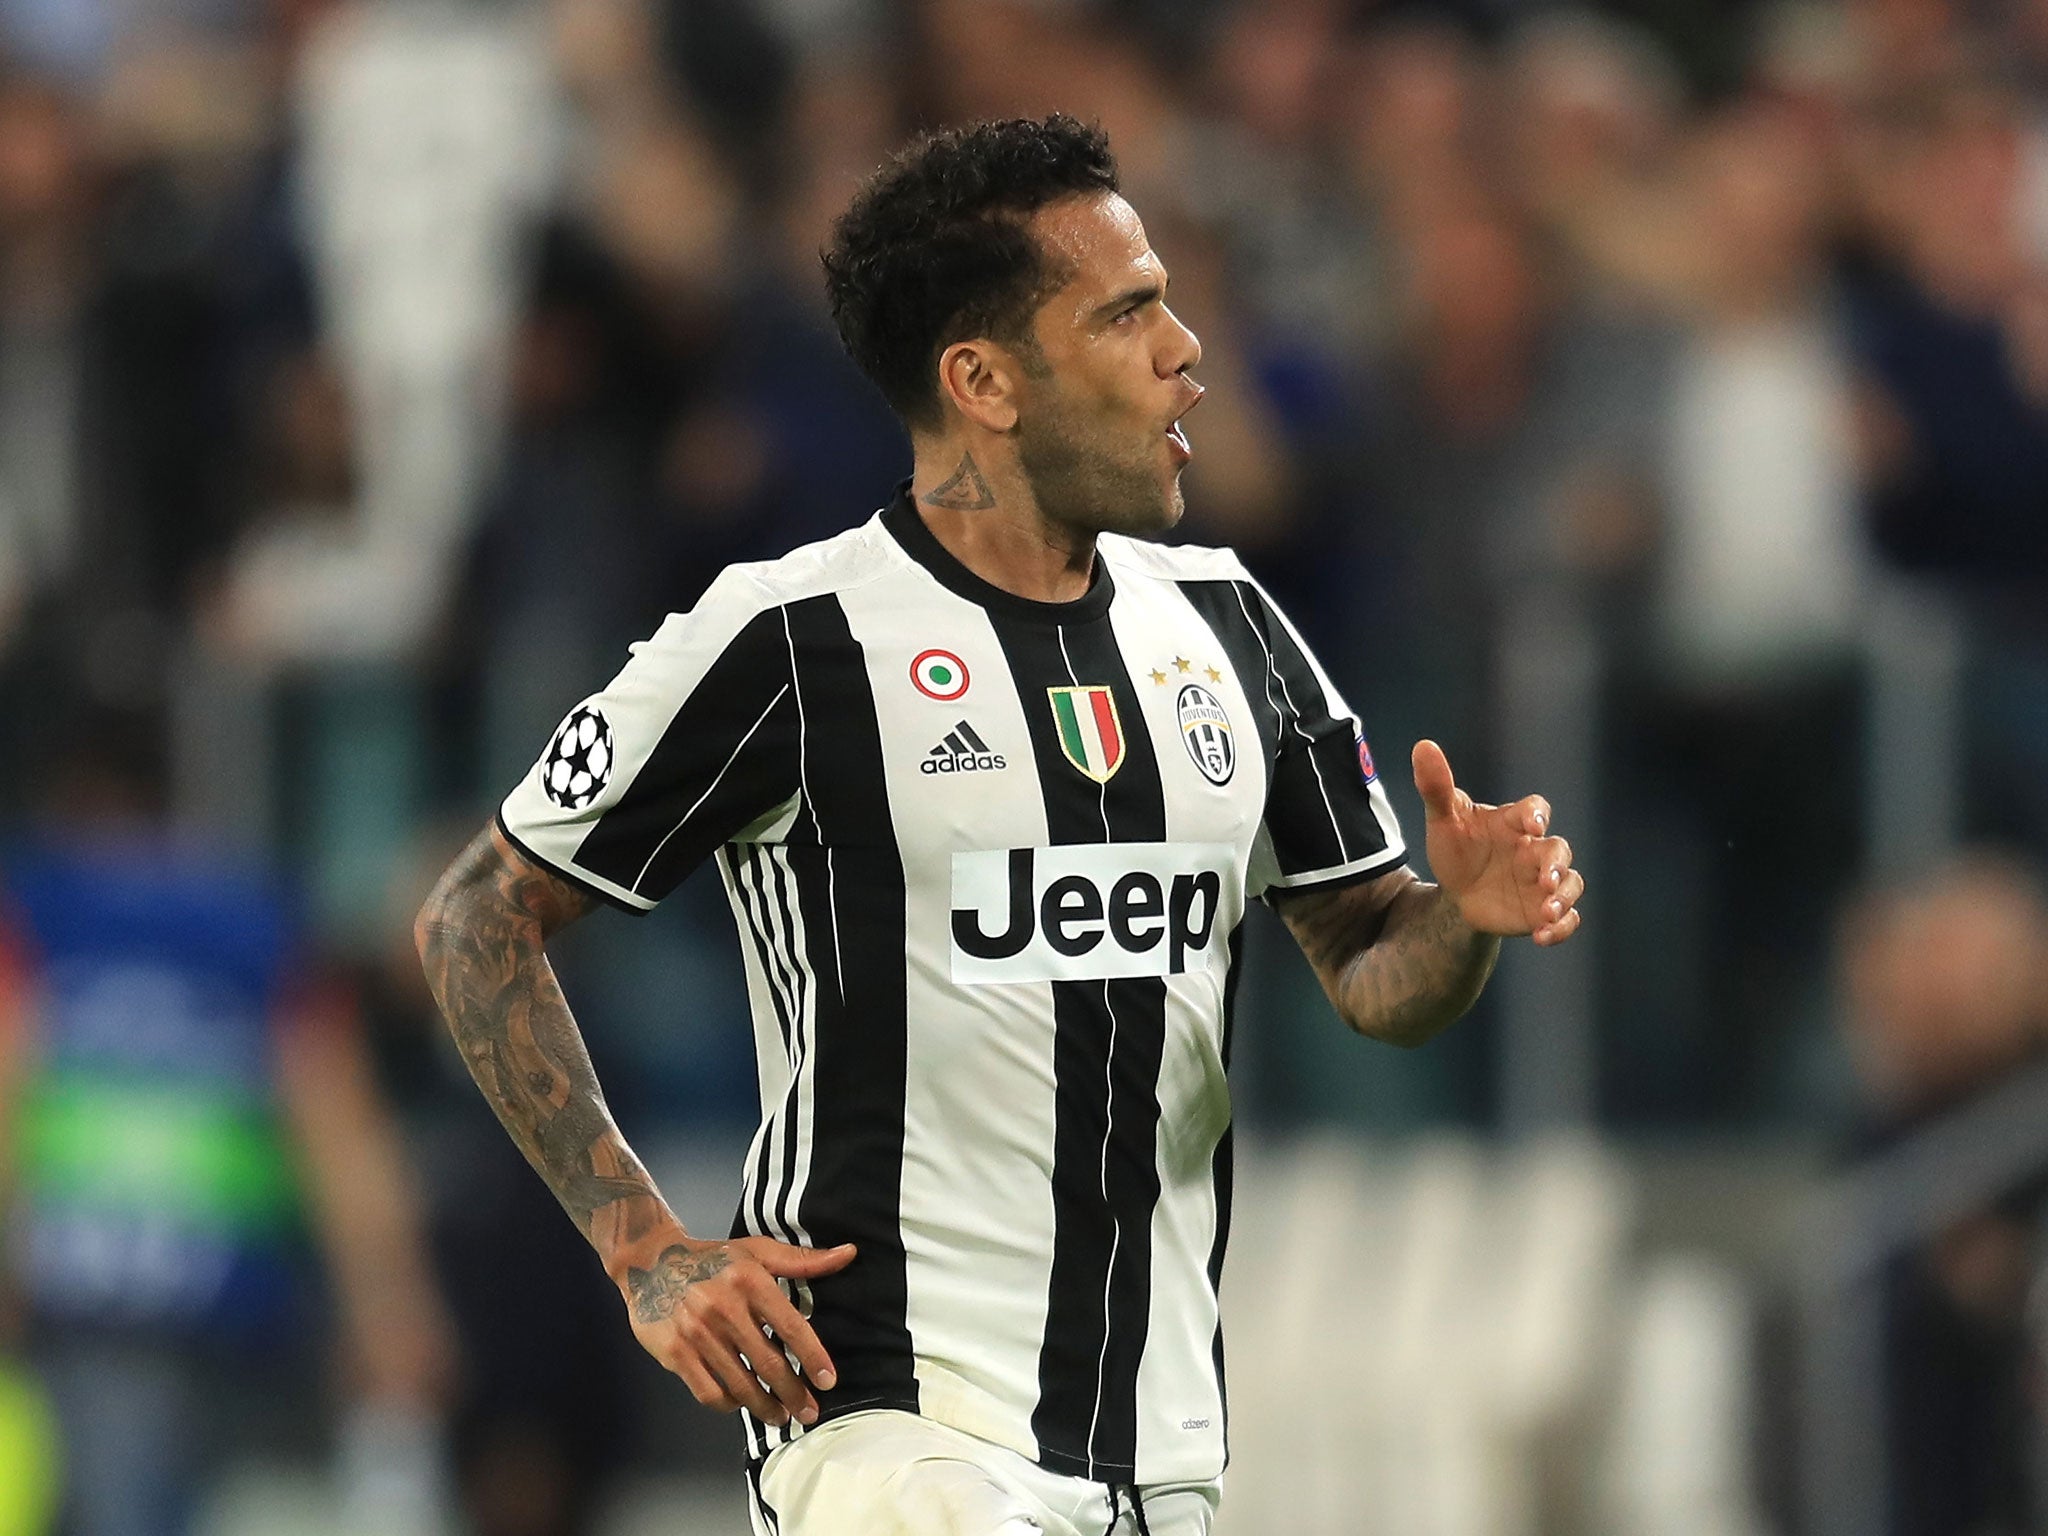 Dani Alves helped Juventus to the Champions League final and a Scudetto last year